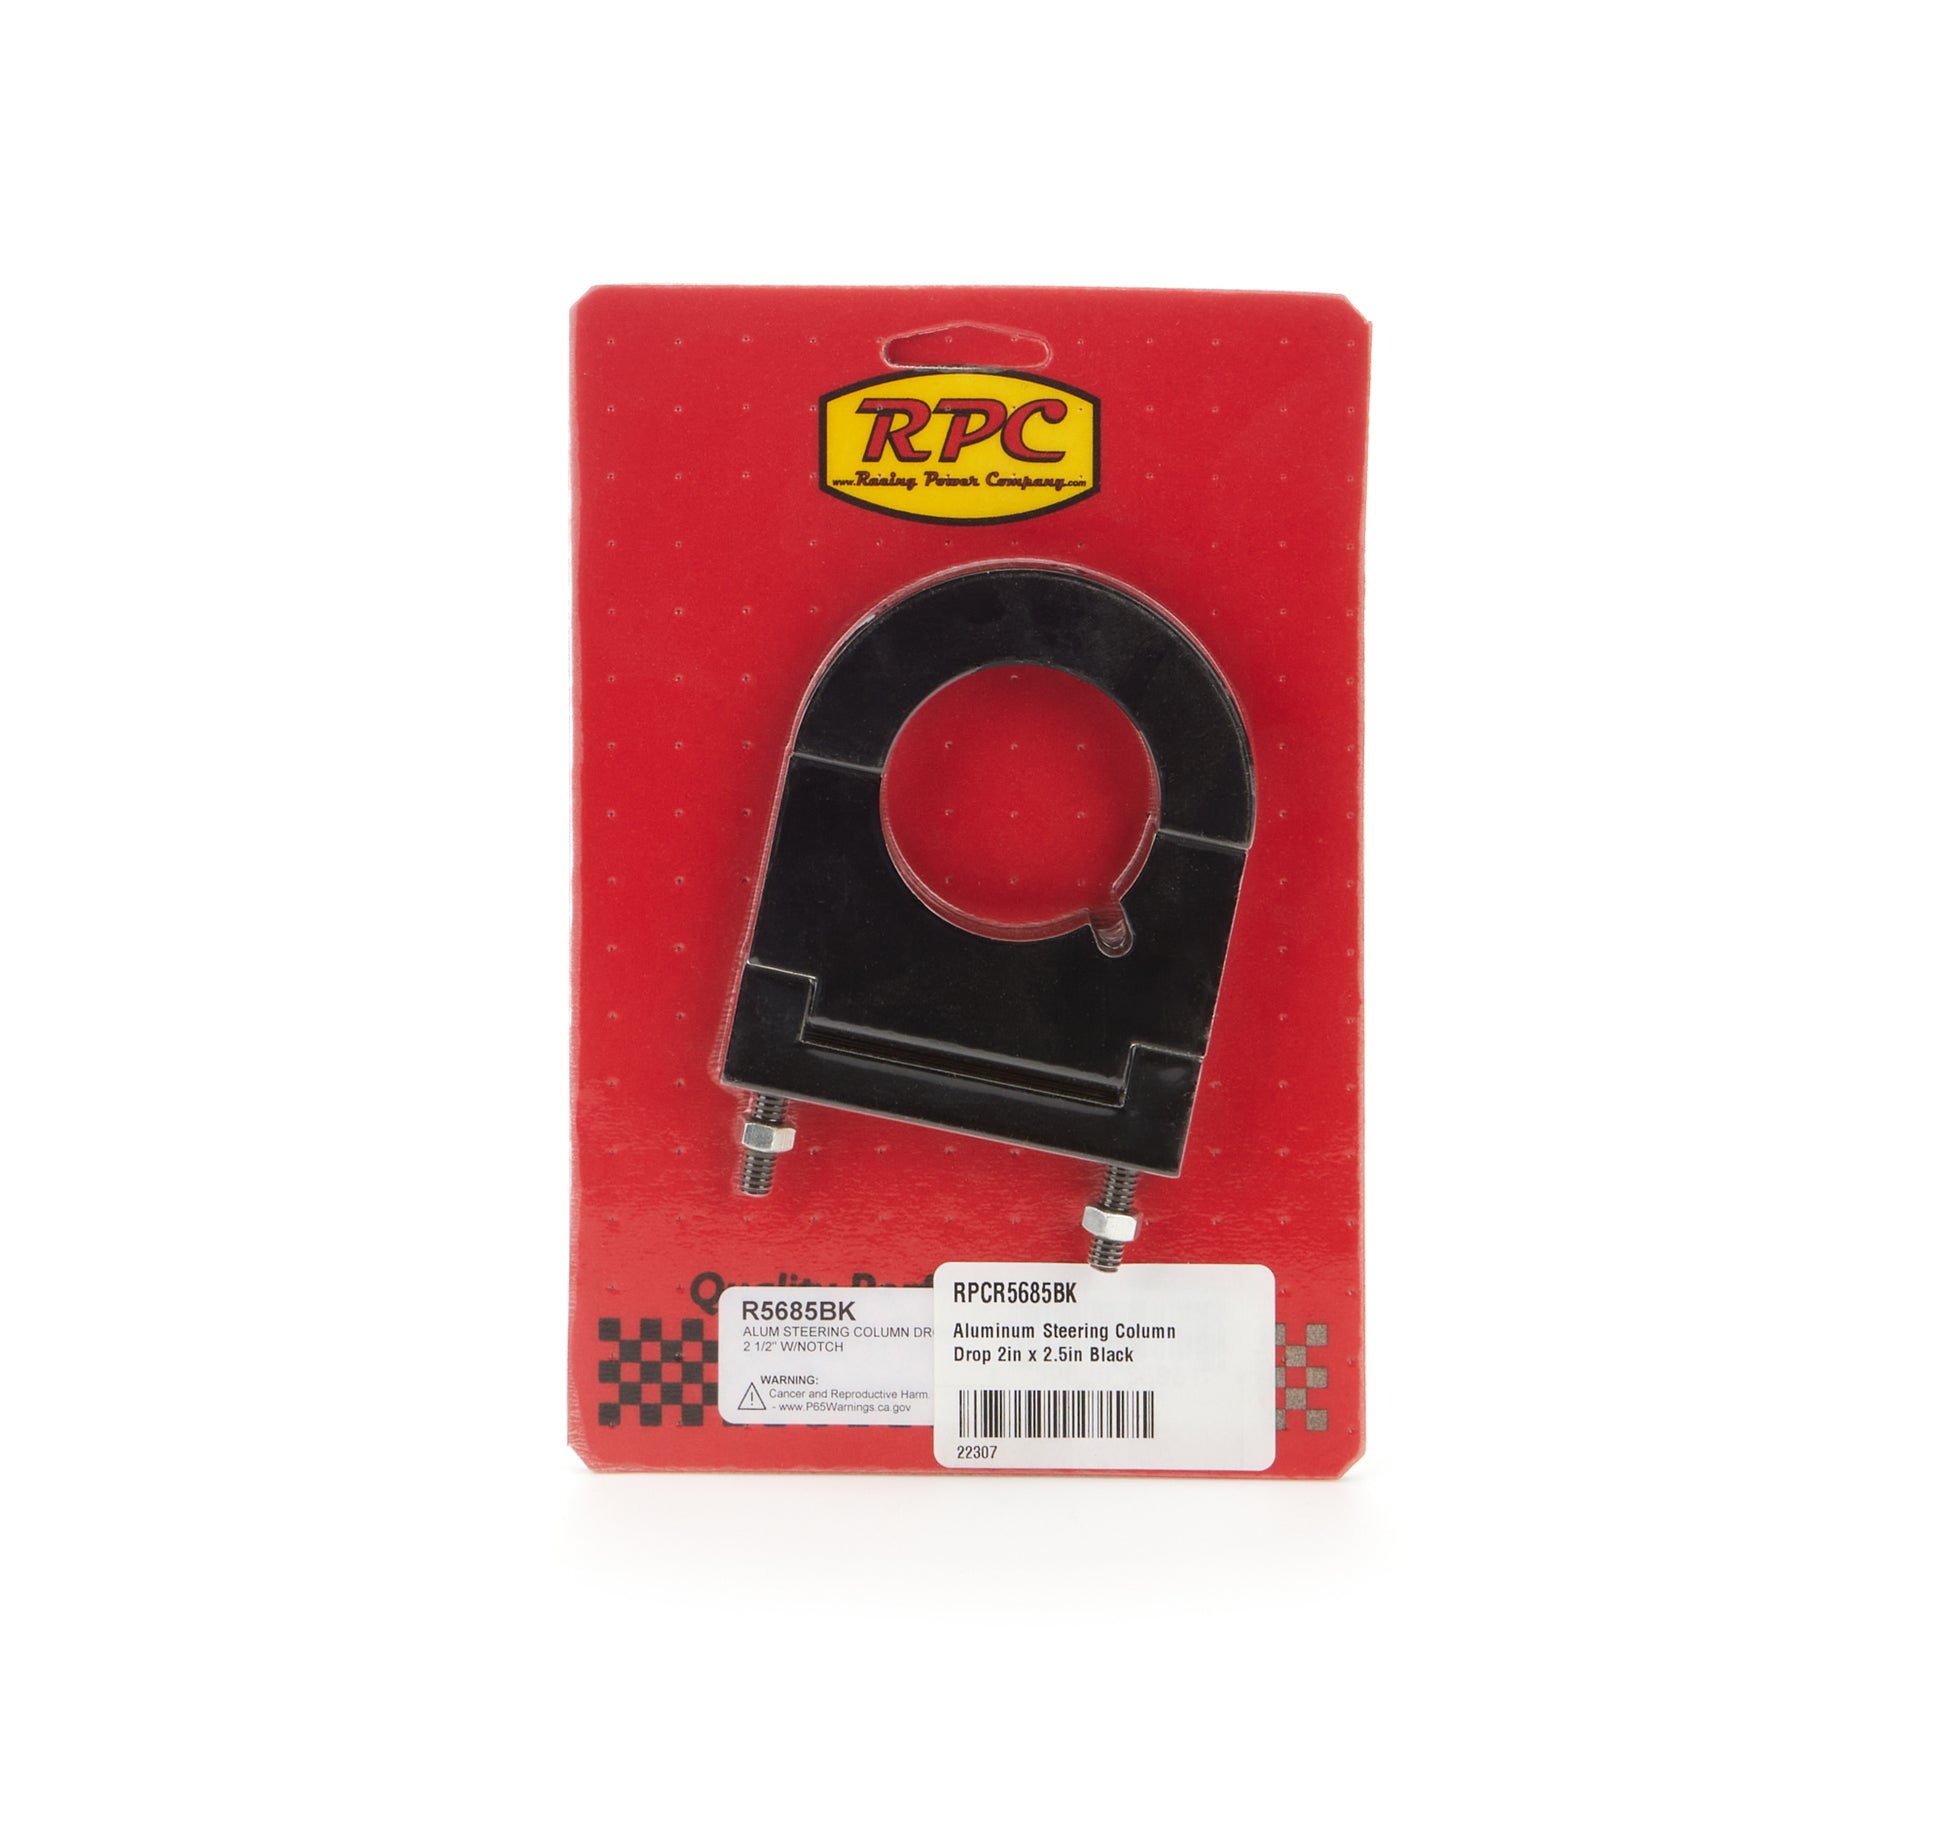 R5685BK RACING POWER CO-PACKAGED